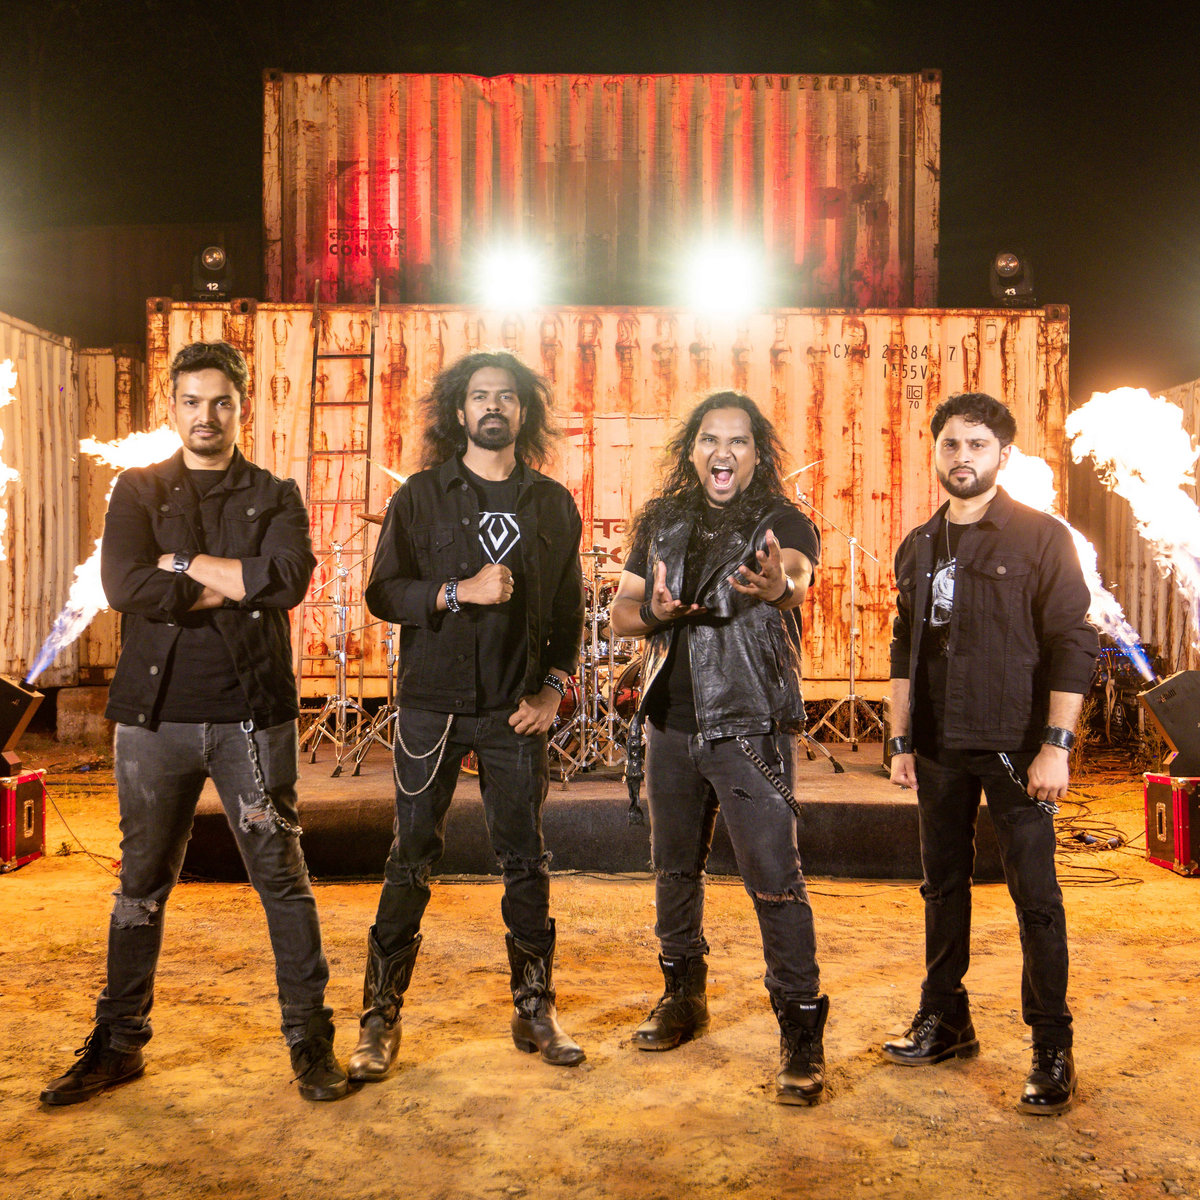 AGAINST EVIL (Heavy Metal - India) - Release 'Give 'Em Hell' (Music Video) - Taken from upcoming album New album 'Give 'Em Hell' releasing July 12, 2024 #againstevil #heavymetal wp.me/p9NC0l-hZB